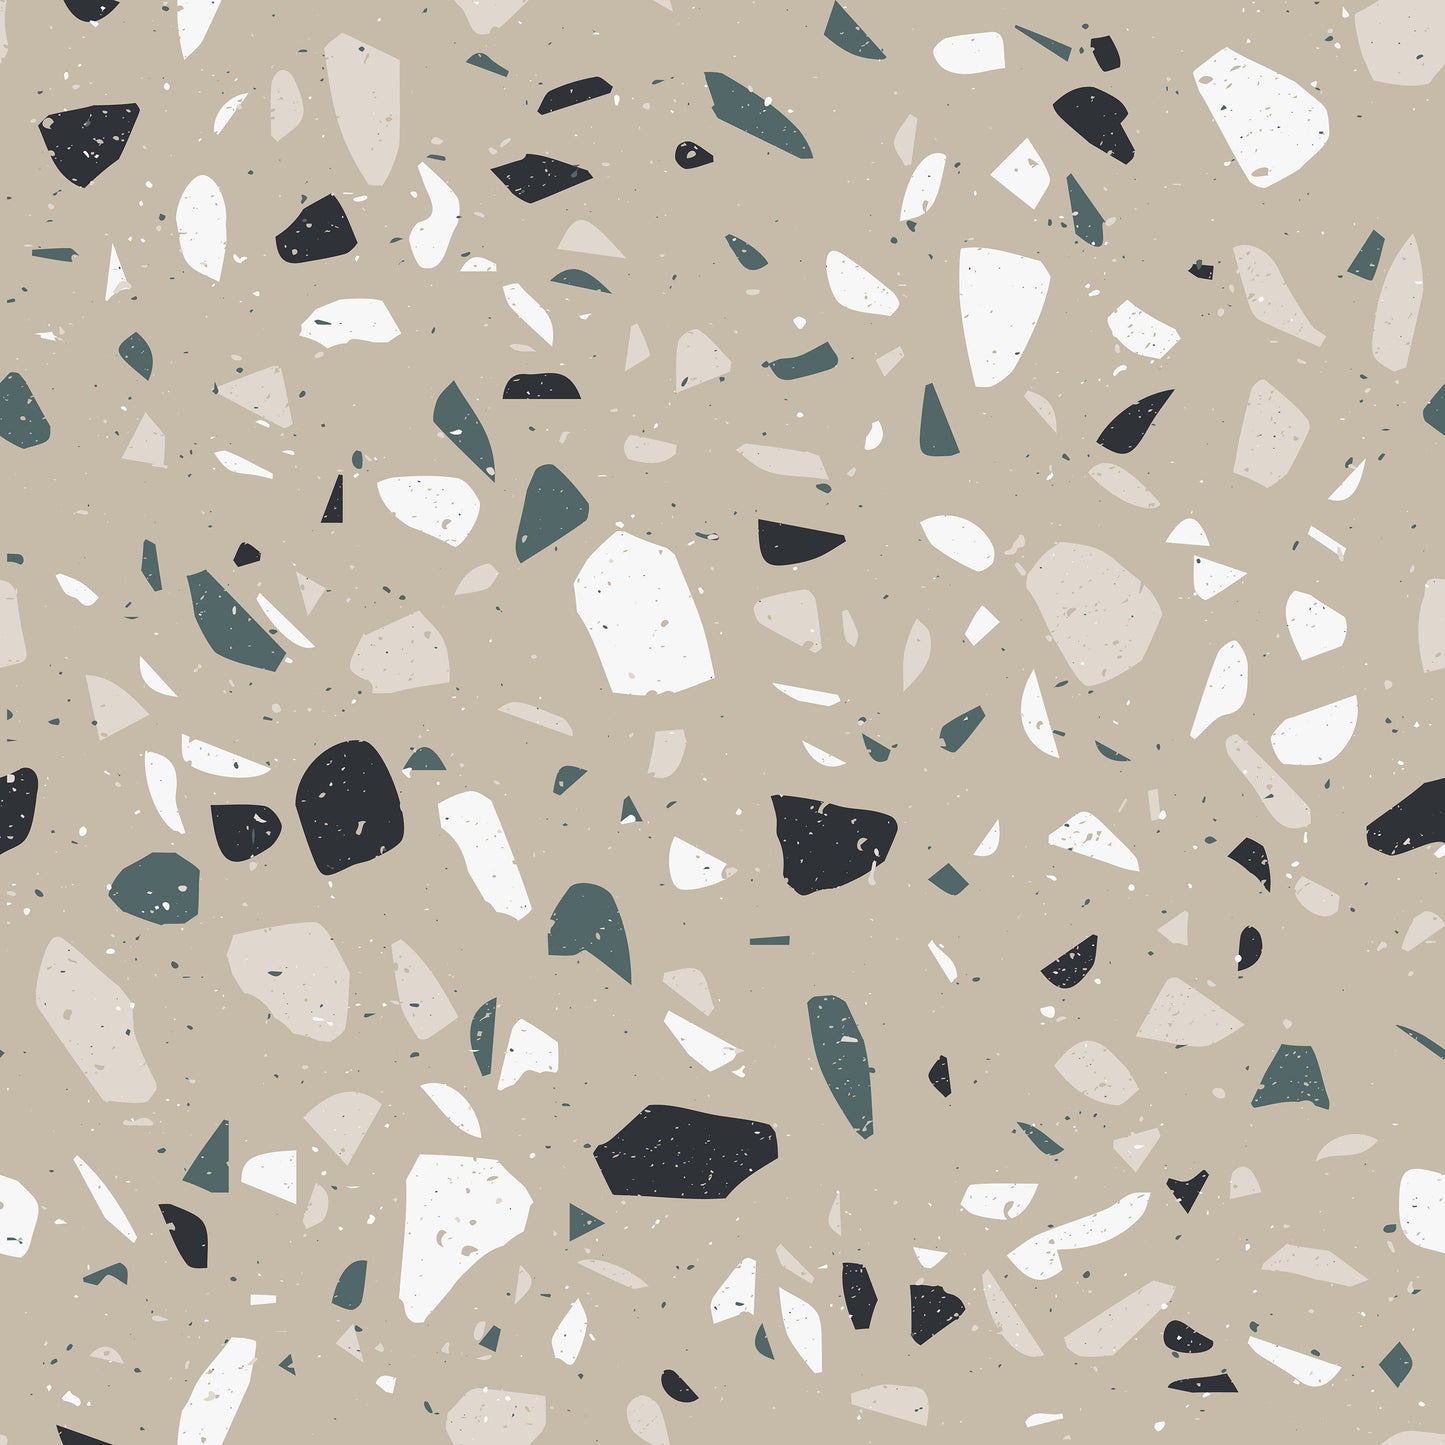 Trendy green, white and dark teal terrazzo medium print on taupe background easy to install and remove peel and stick custom wallpaper available in different lengths/sizes locally created and printed in Canada wallpaper. Washable, durable, commercial grade, removable and waterproof.